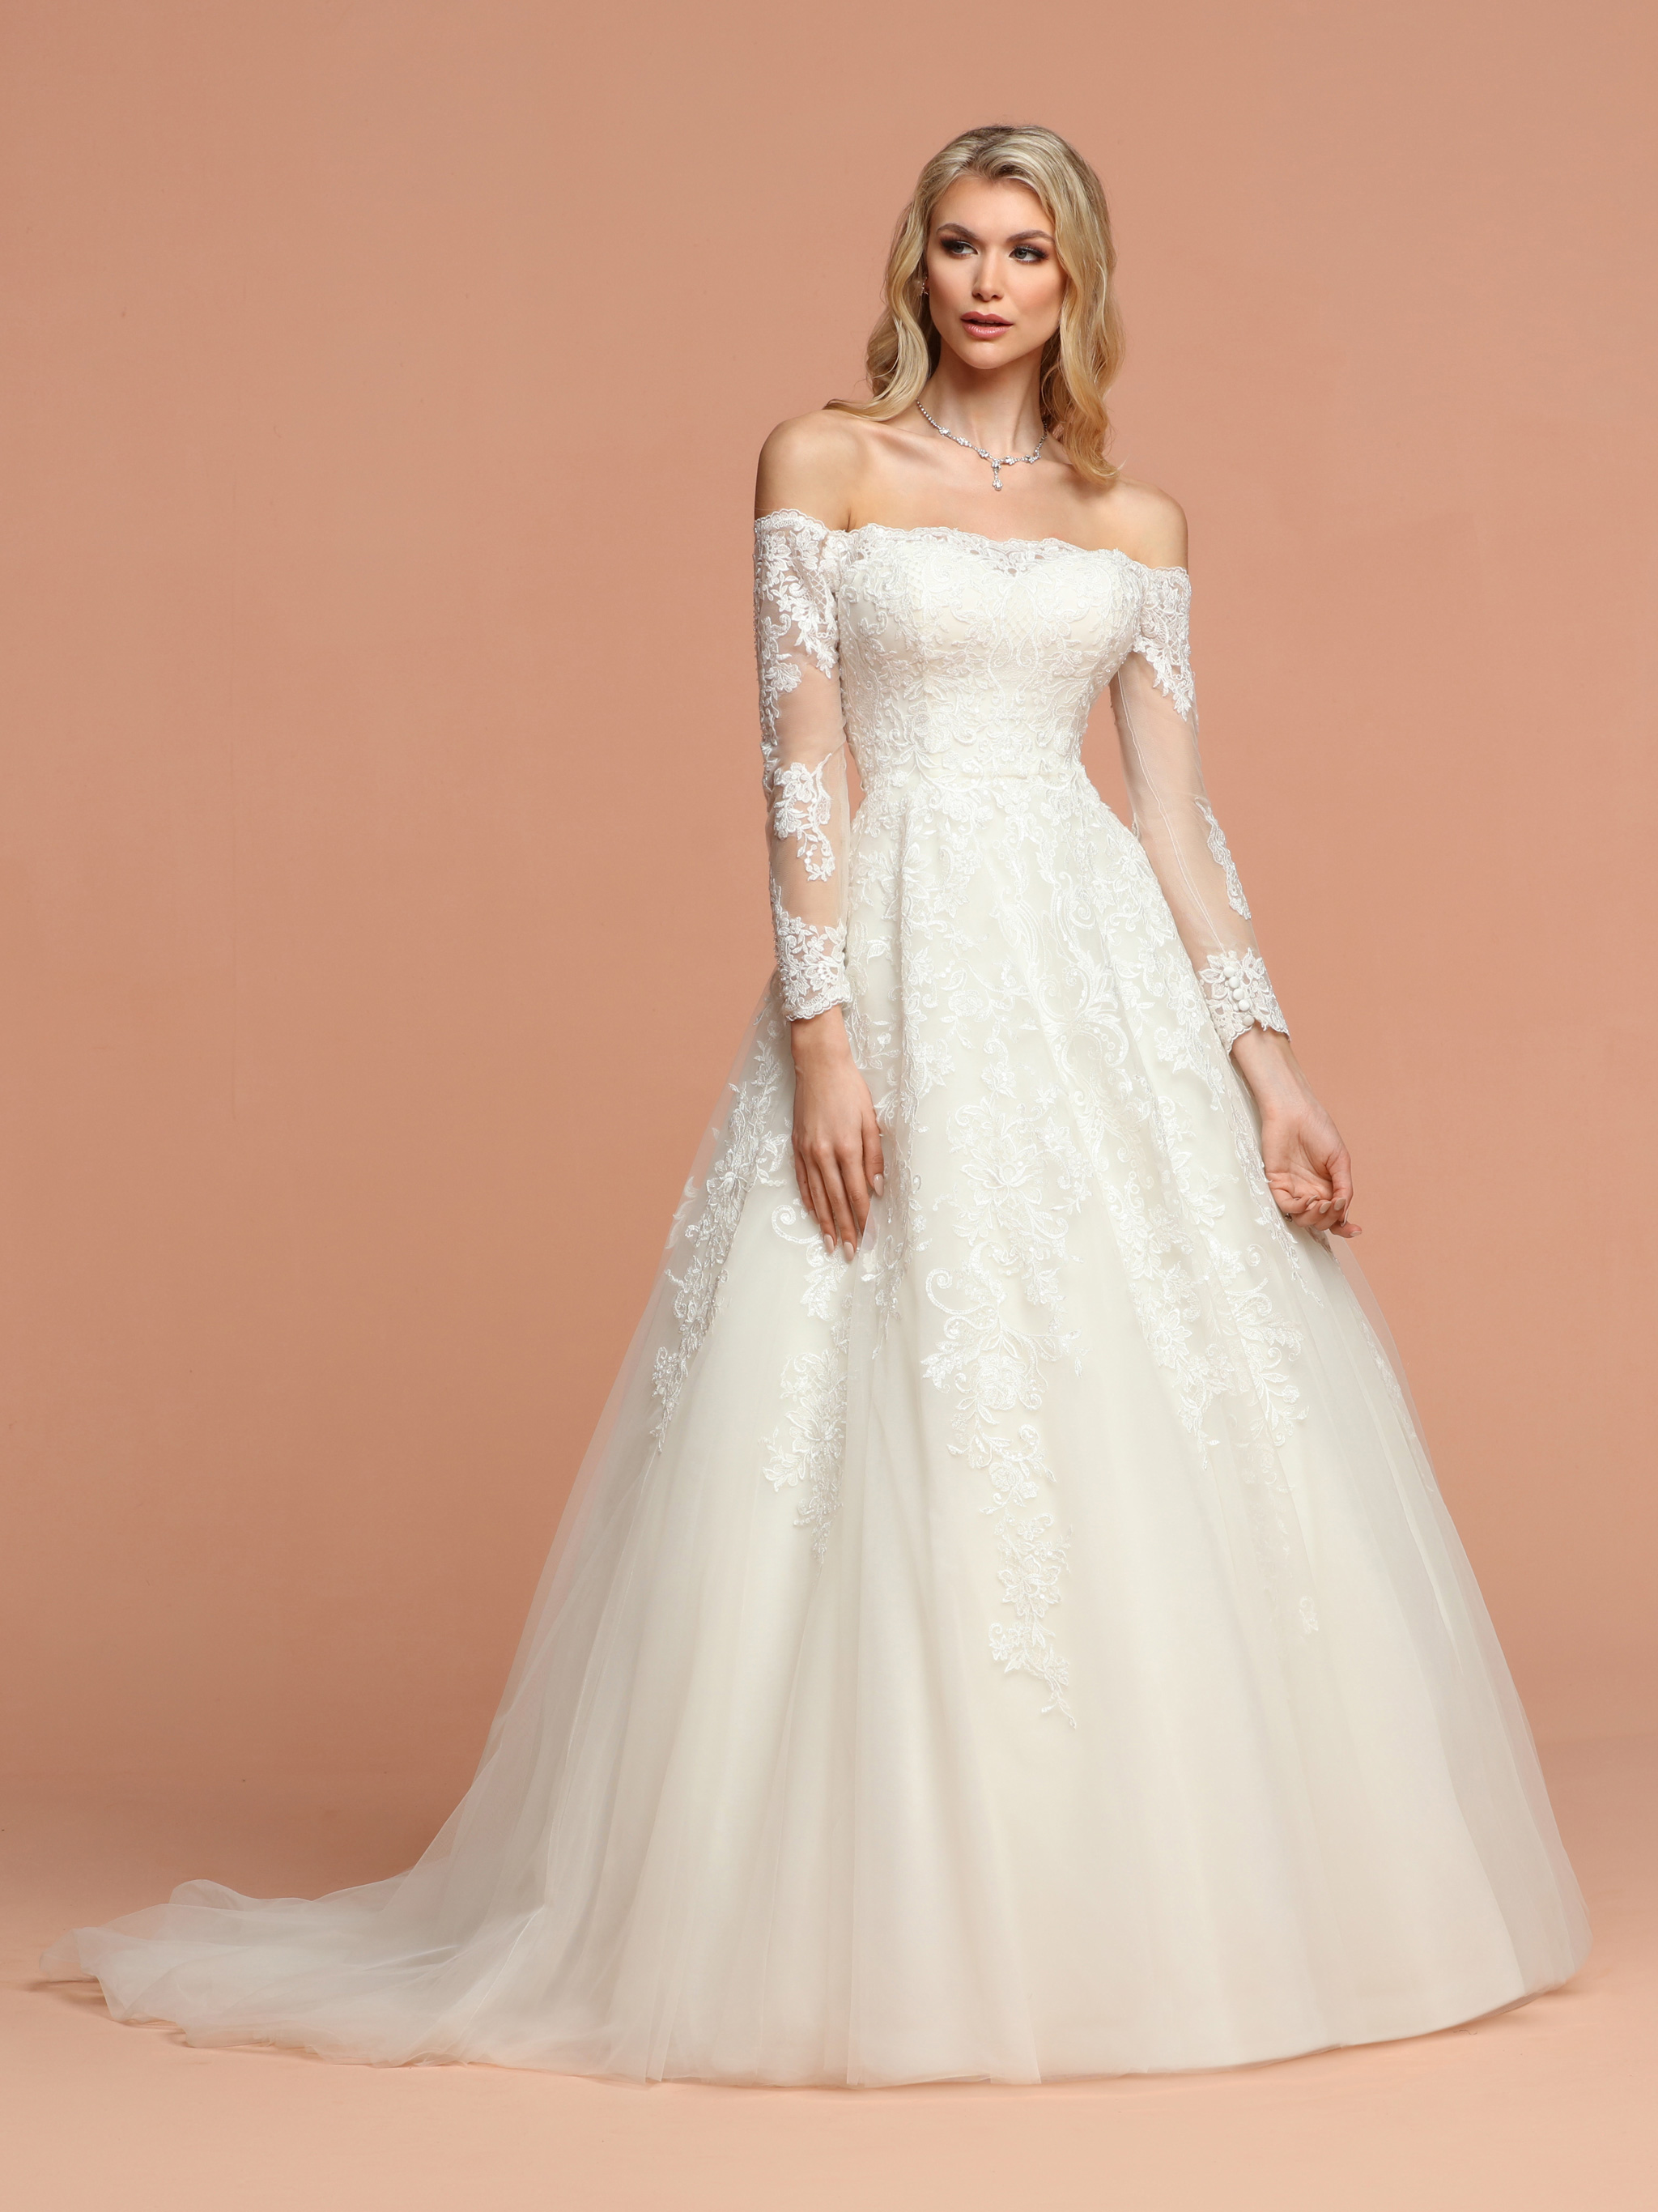 Wedding Gown Guide – What to Wear for Short, Tall, Hourglass, Chubby, and  Skinny Brides? - HubPages